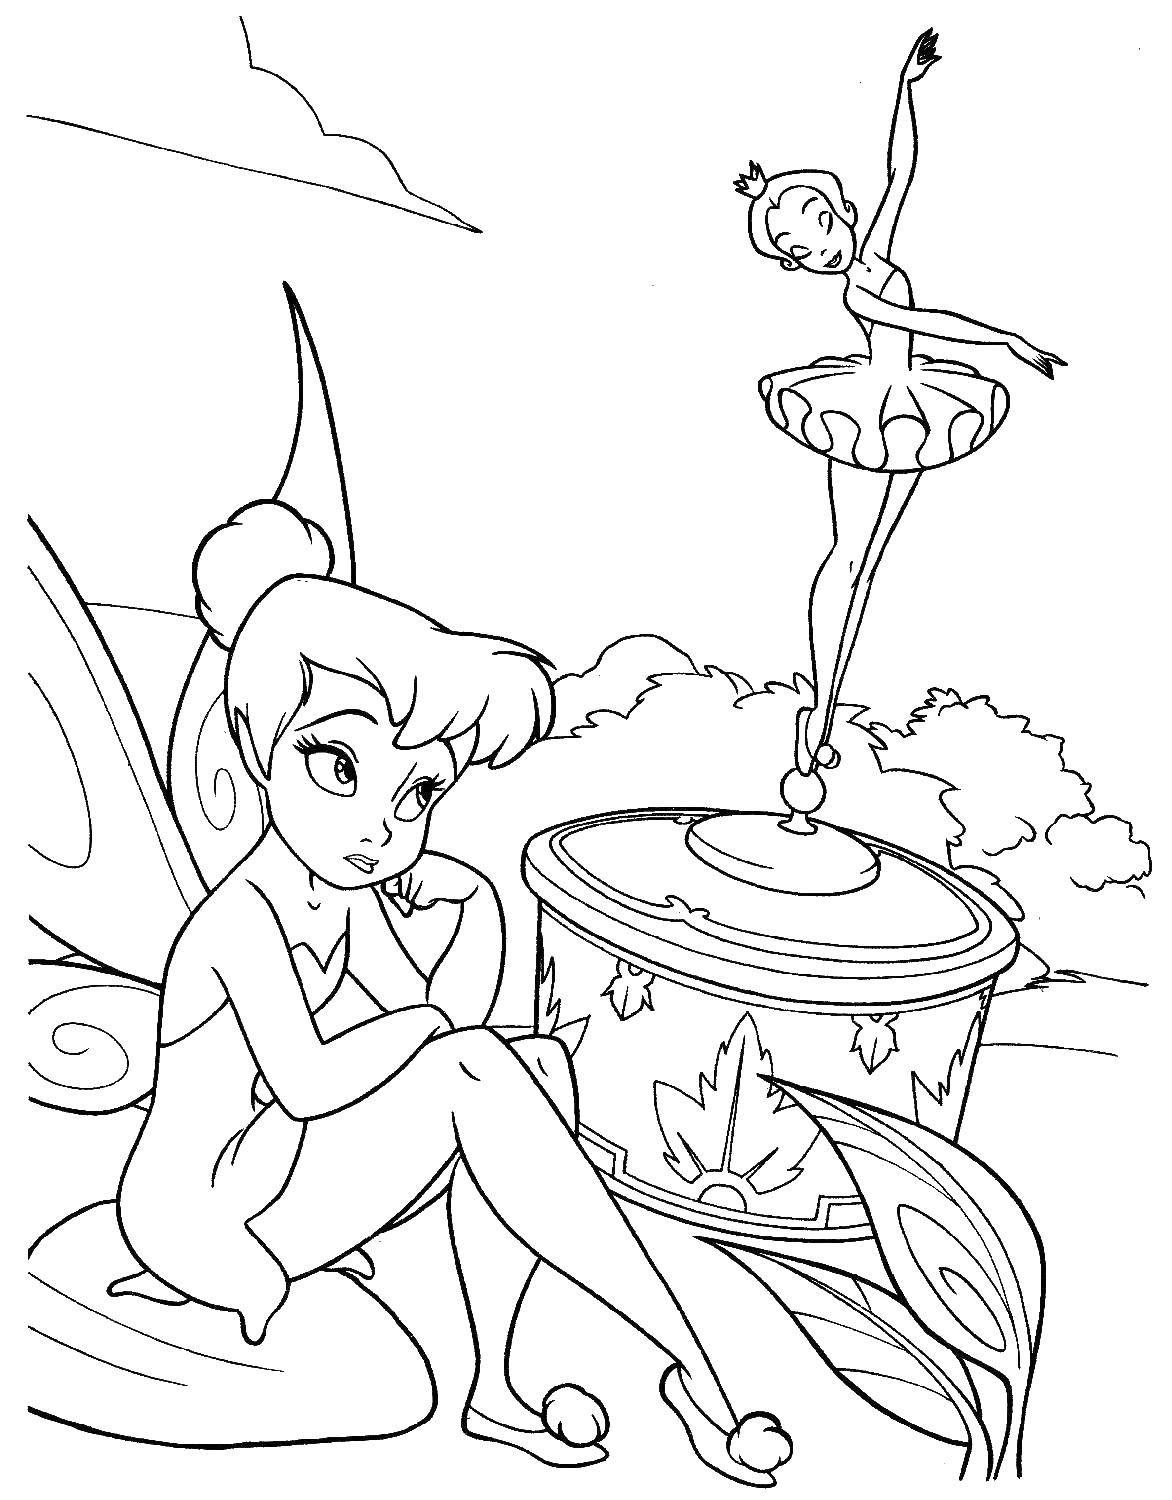 Coloring Tinker bell and the lost. Category fairy. Tags:  fairy, Dindin.